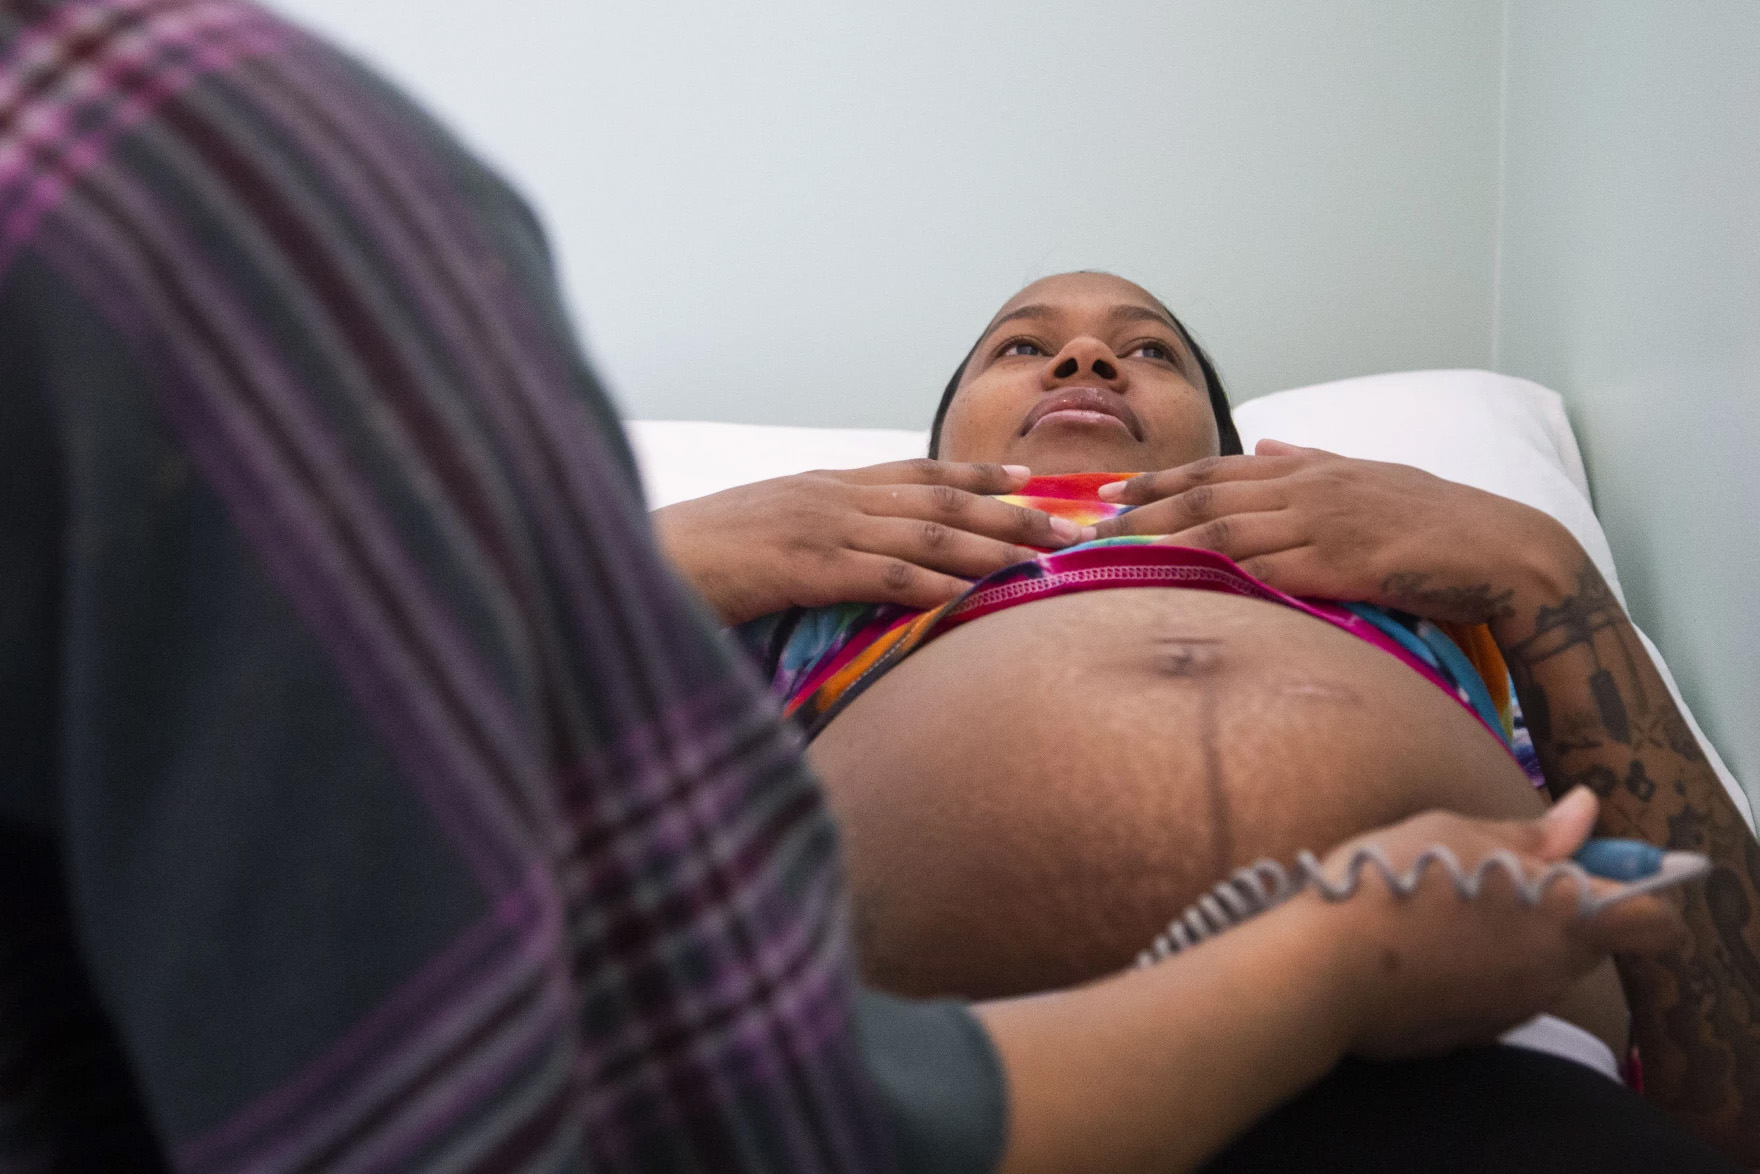 A pregnant woman is seen laying back with her stomach exposed as a nurse examines her. The woman laying back is Cherish Sims.